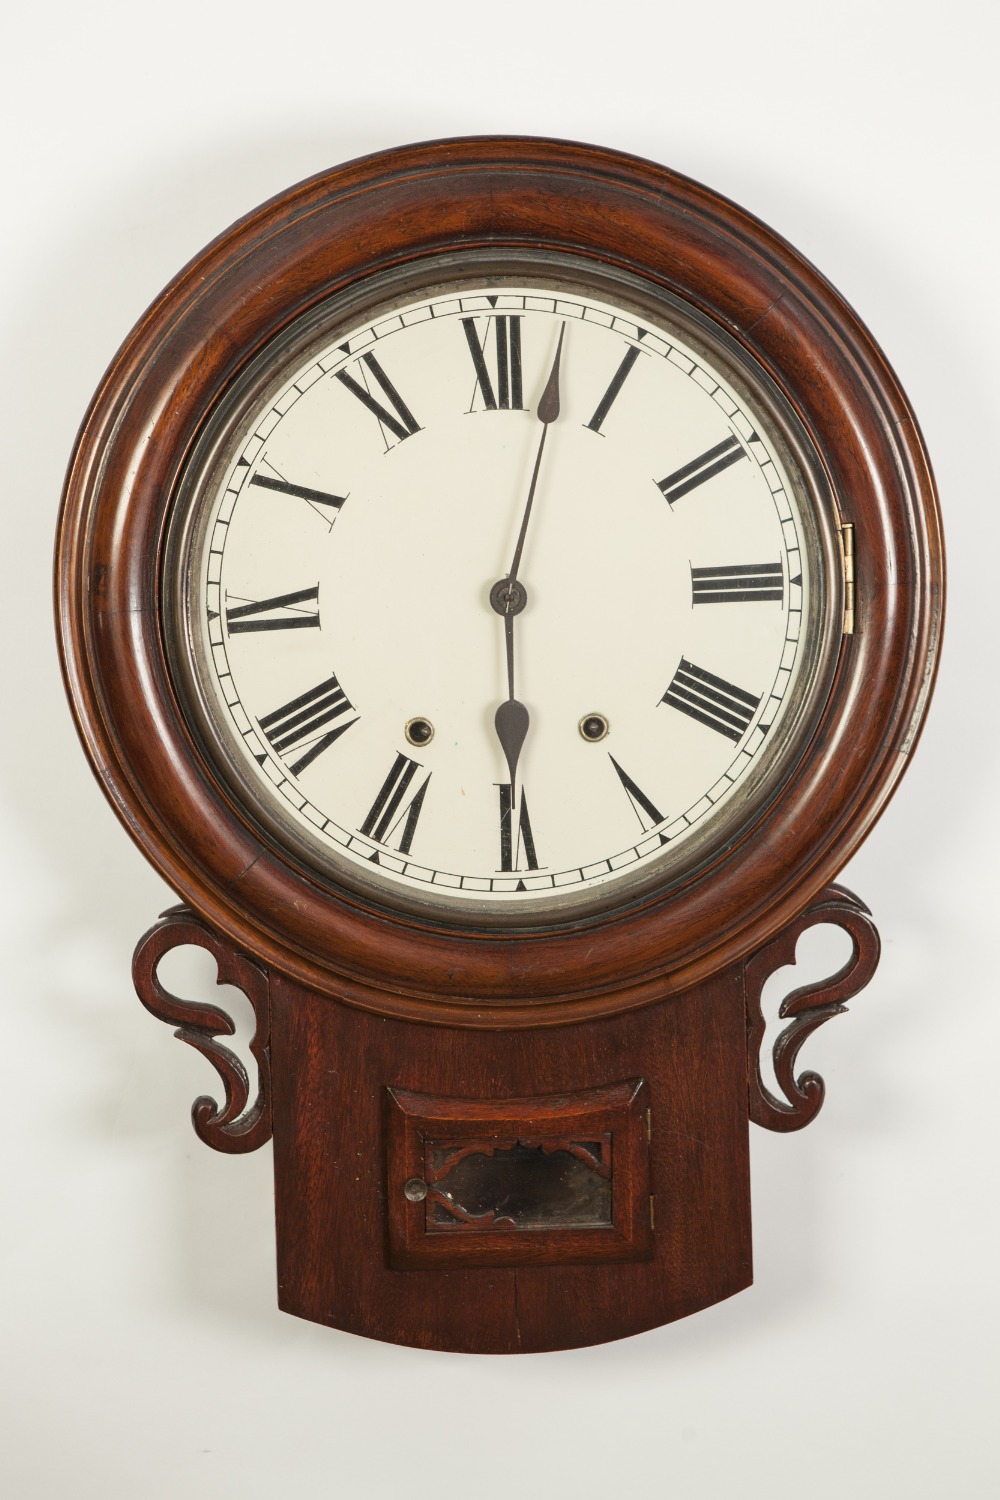 LATE NINETEENTH/EARLY TWENTIETH CENTURY MAHOGANY DROP DIAL WALL CLOCK, the 12" Roman dial powered by